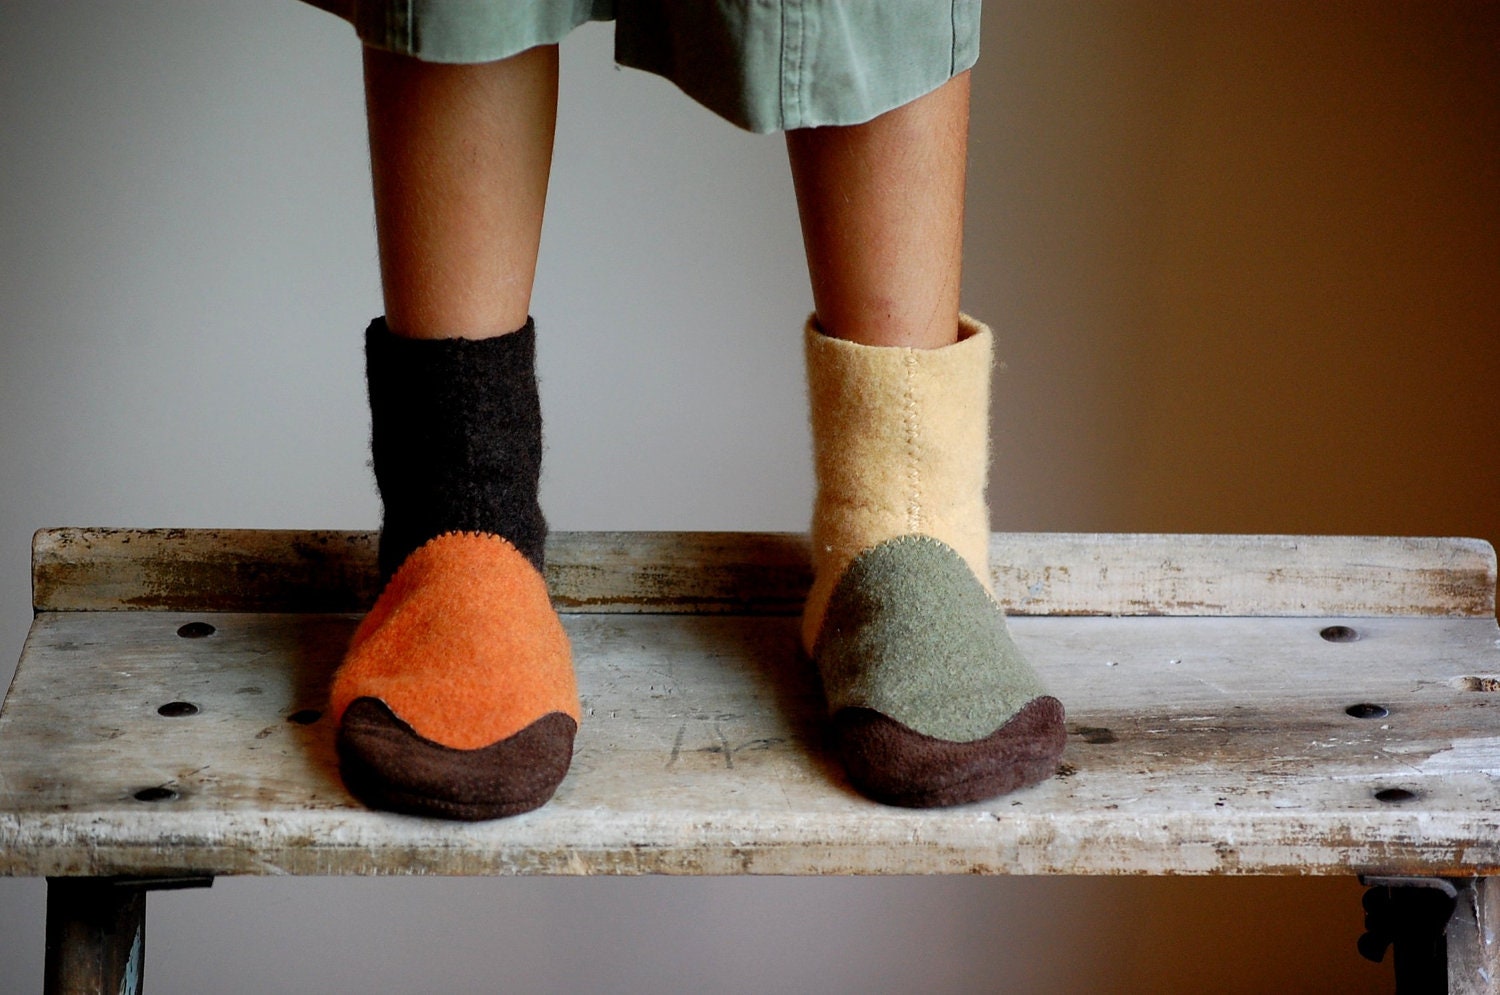 Autumn Wool Slippers with Leather Soles, Eco Friendly, kids sizes 9.5, 11.5, Mixed Vegetables